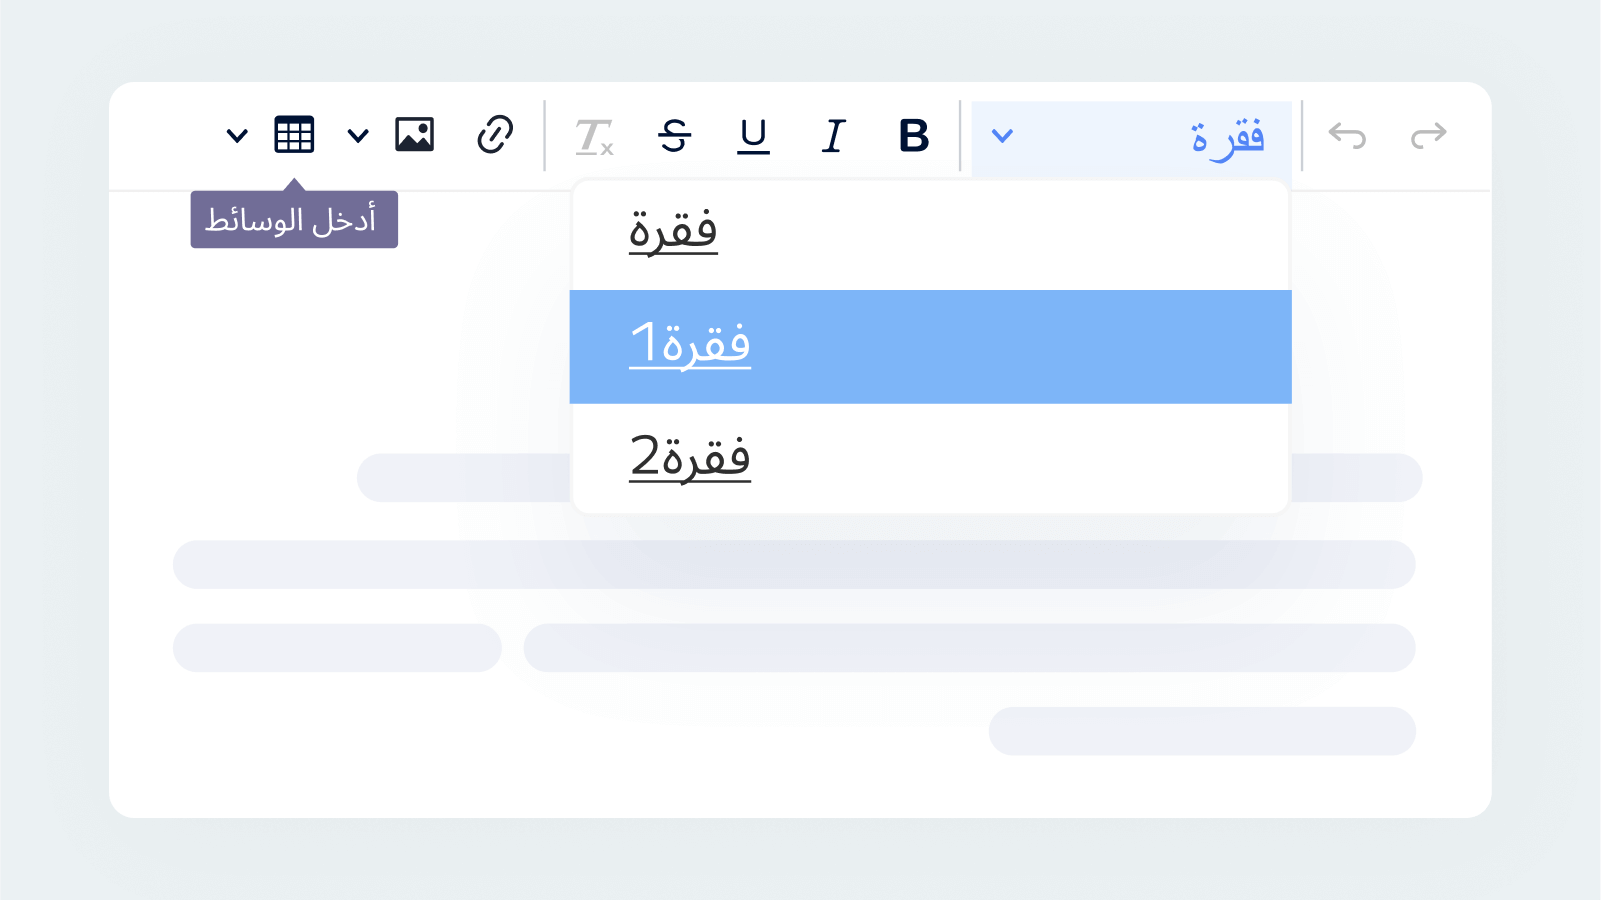 CKEditor 5 offers a fully translated UI in over 40 languages, including Asian and RTL languages